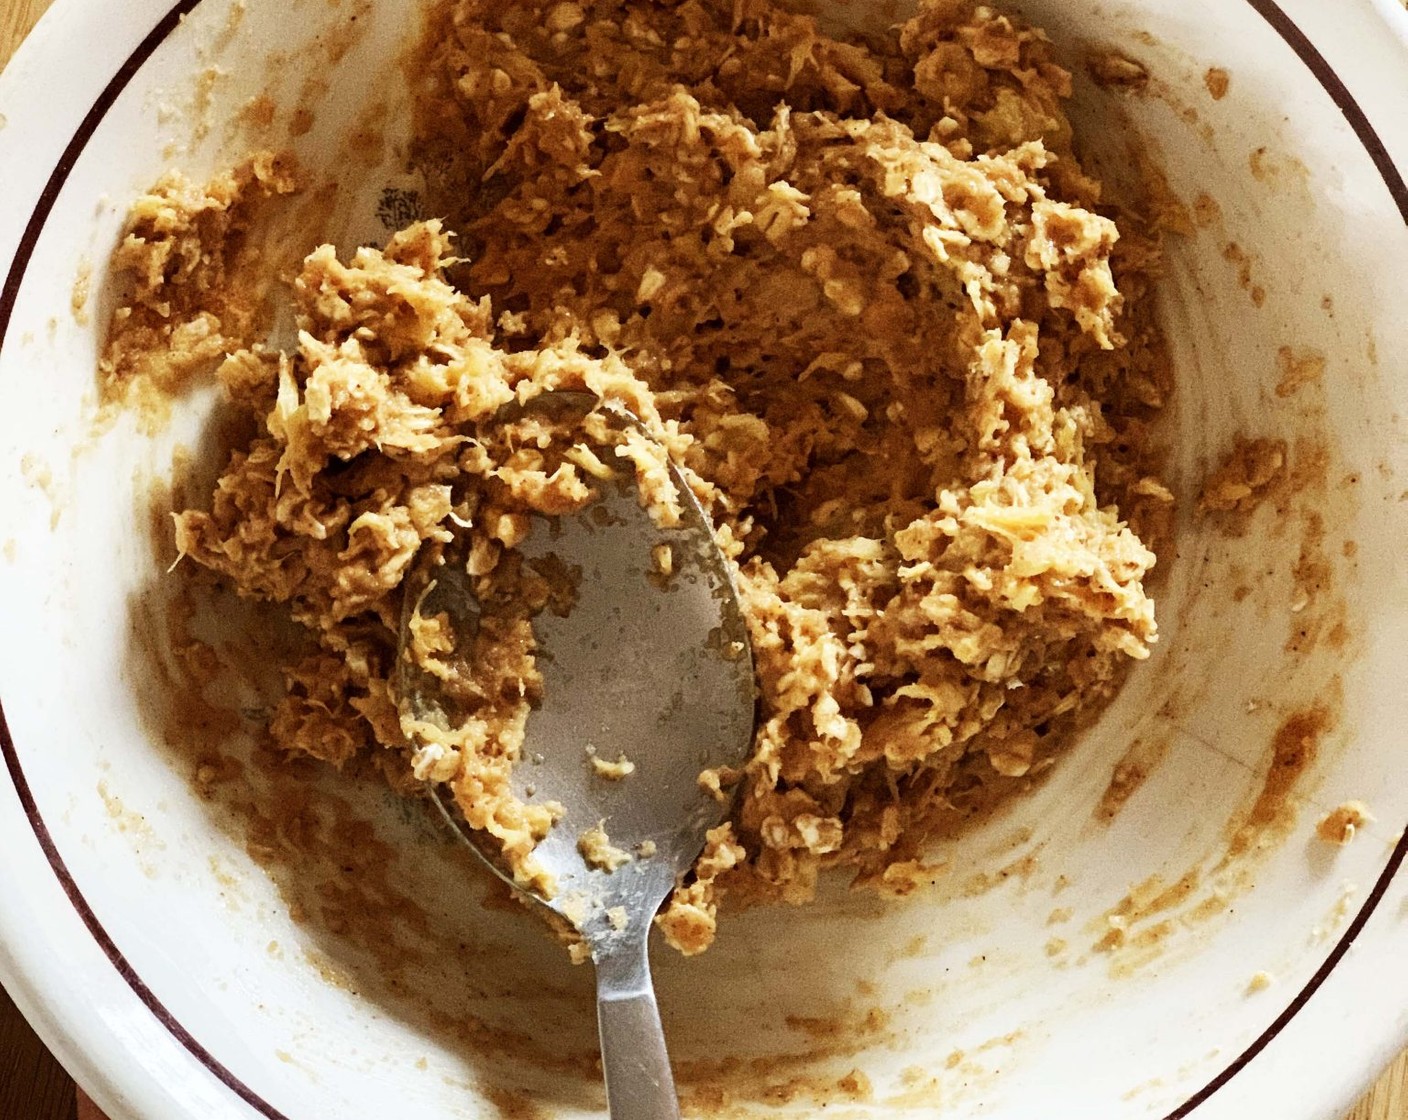 step 2 Once soft, smash with a fork. Stir in the Natural Peanut Butter (2 1/2 Tbsp), Hazelnut Flour (1/4 cup), and Quick Cooking Oats (2/3 cup).